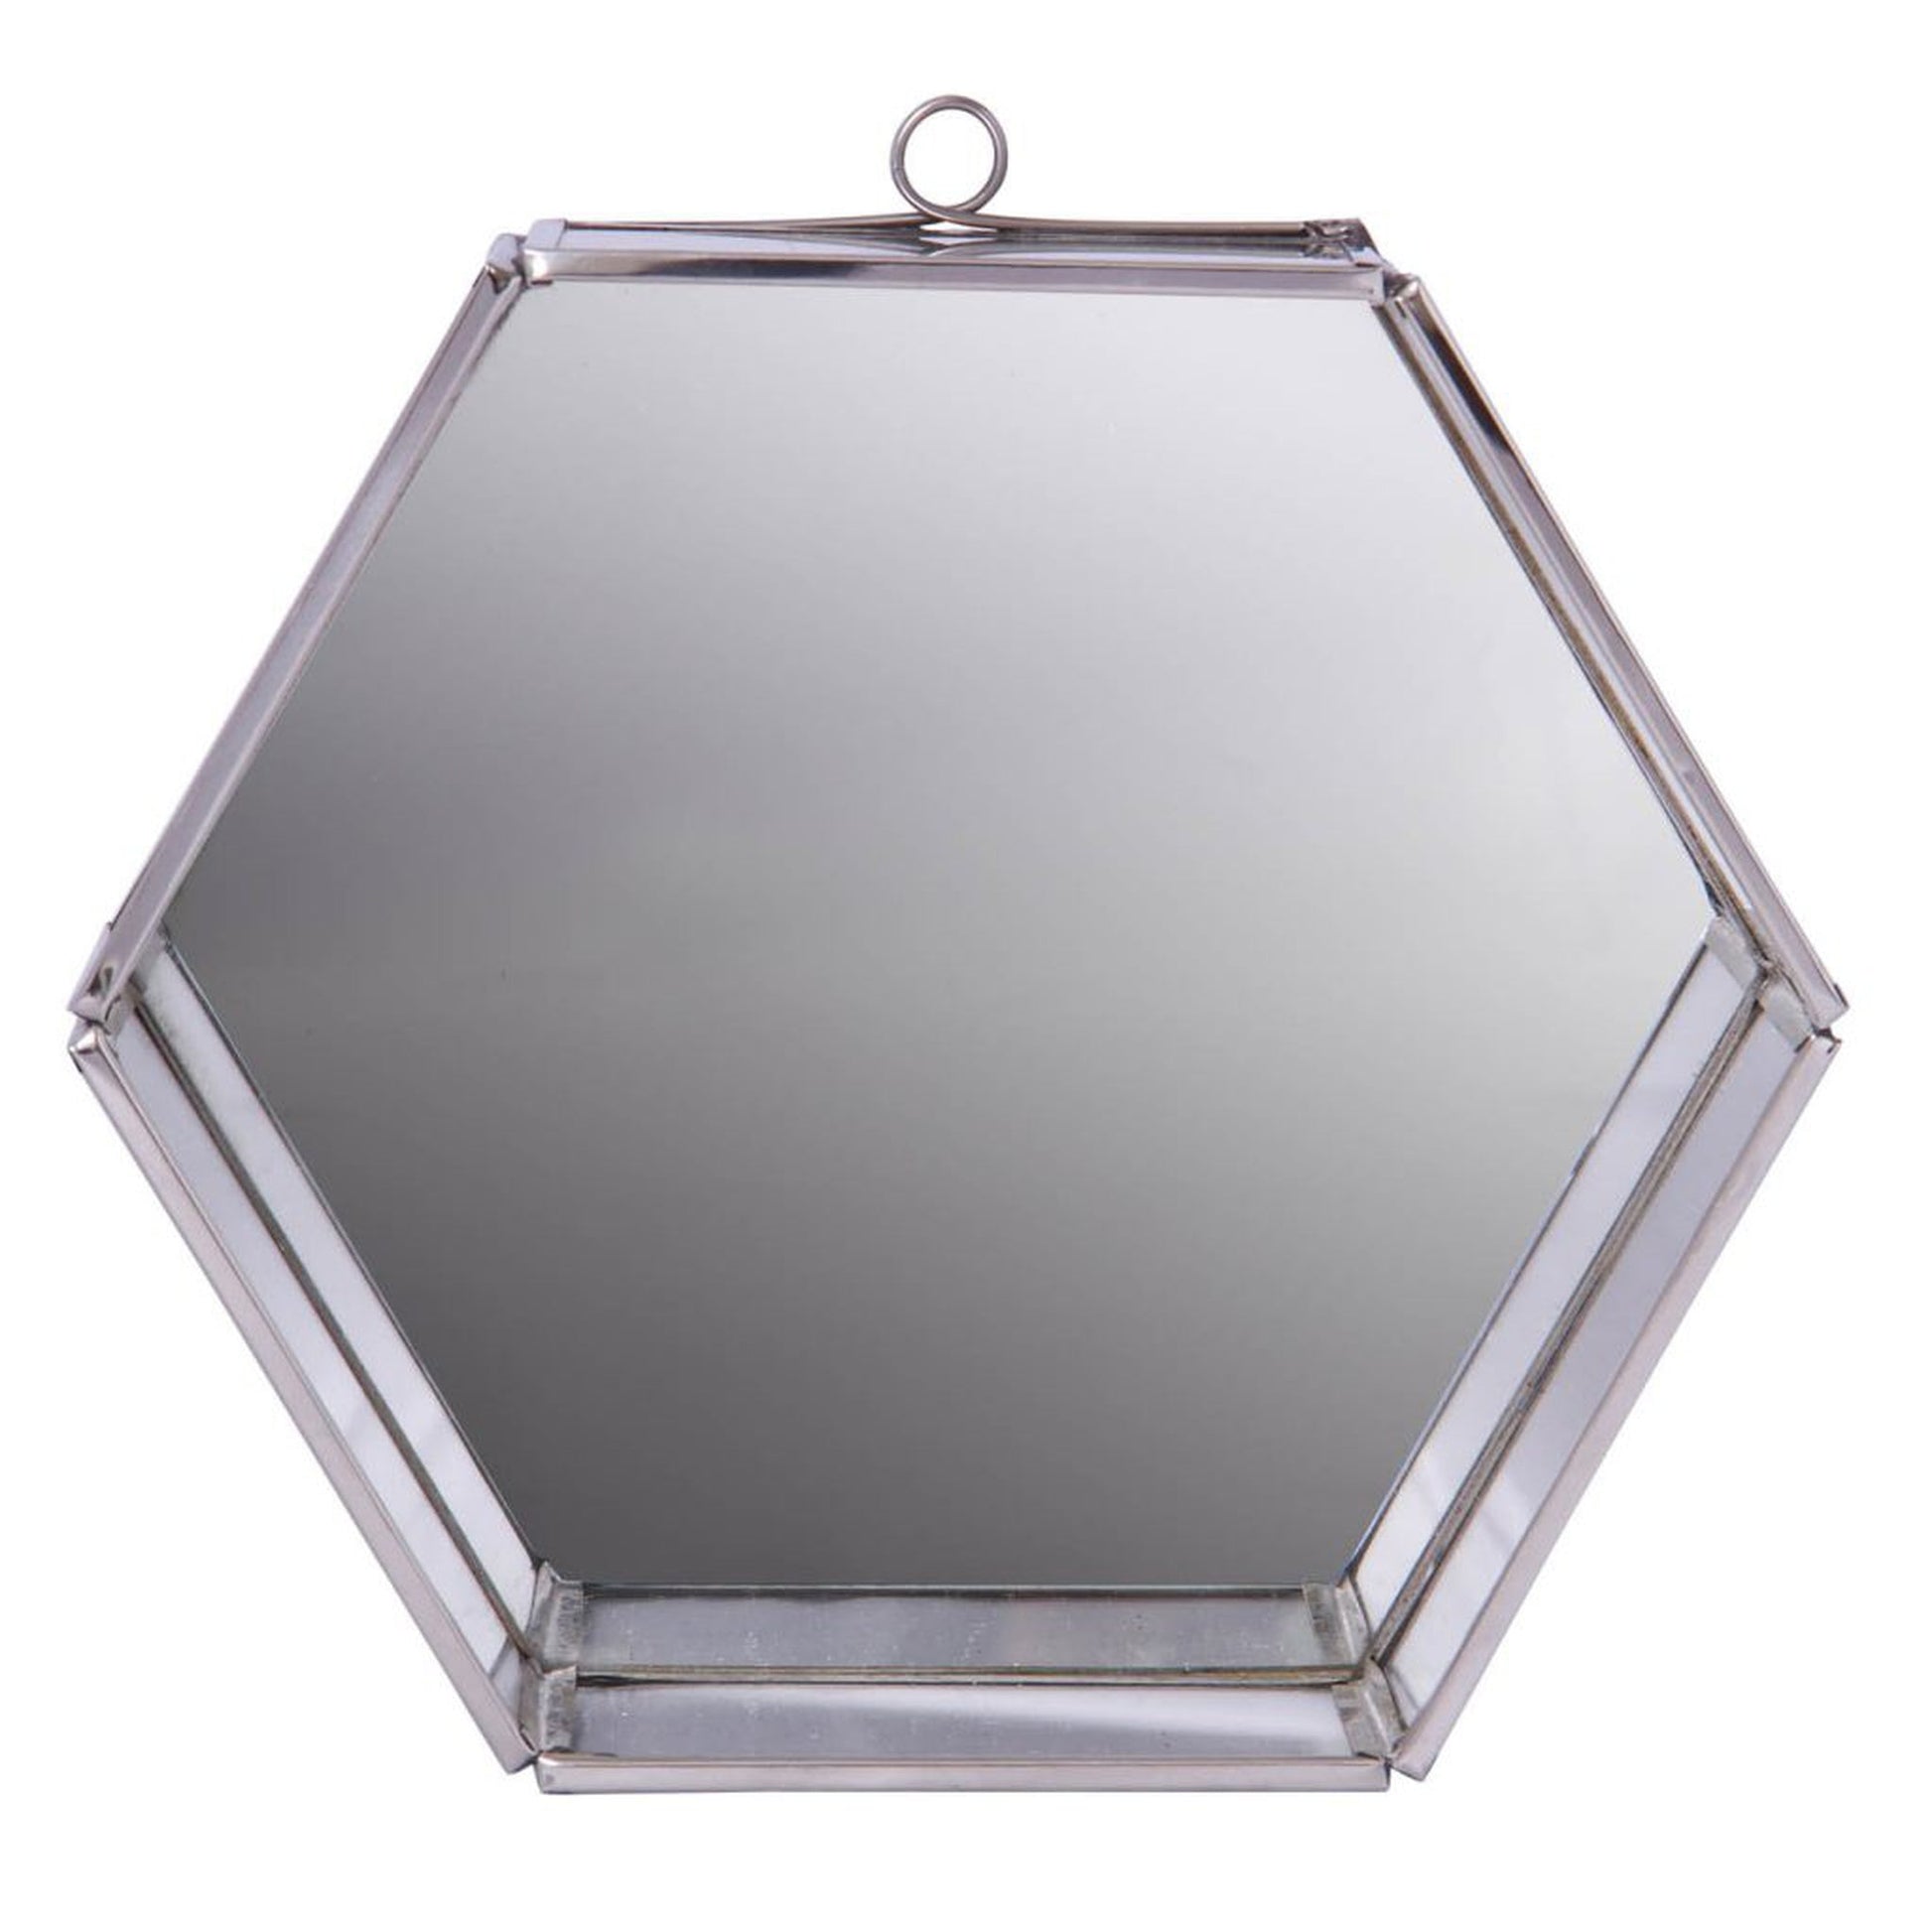 A&B Home Nico 8" x 7" Bundle of 68 Hexagon Stainless Steel Frame Wall-Mounted Mirror